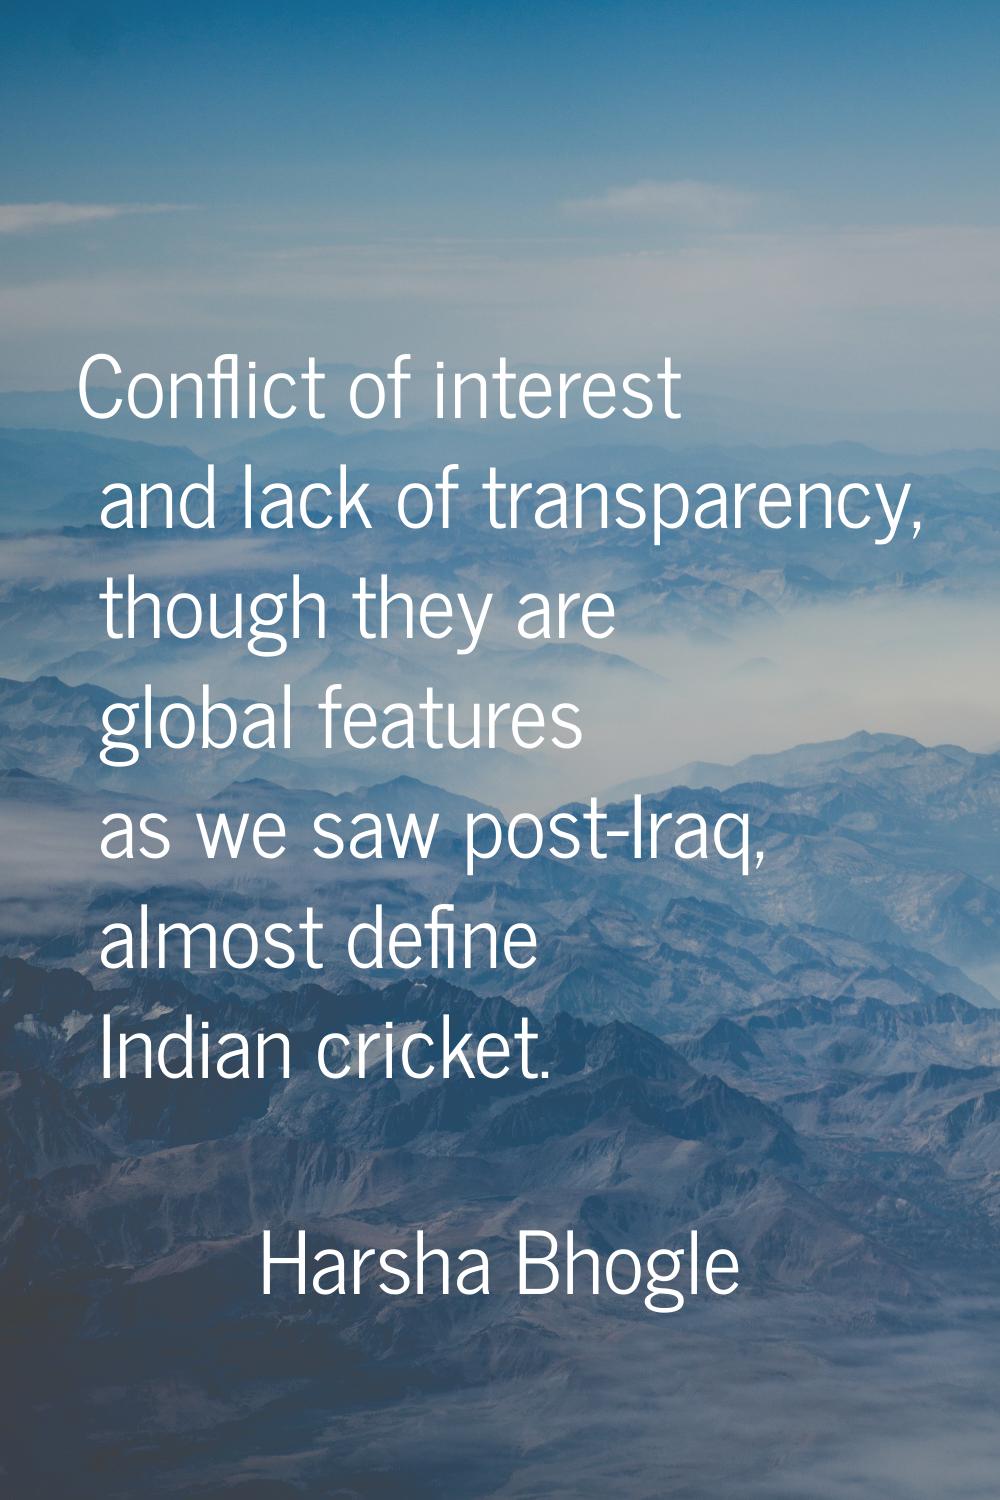 Conflict of interest and lack of transparency, though they are global features as we saw post-Iraq,